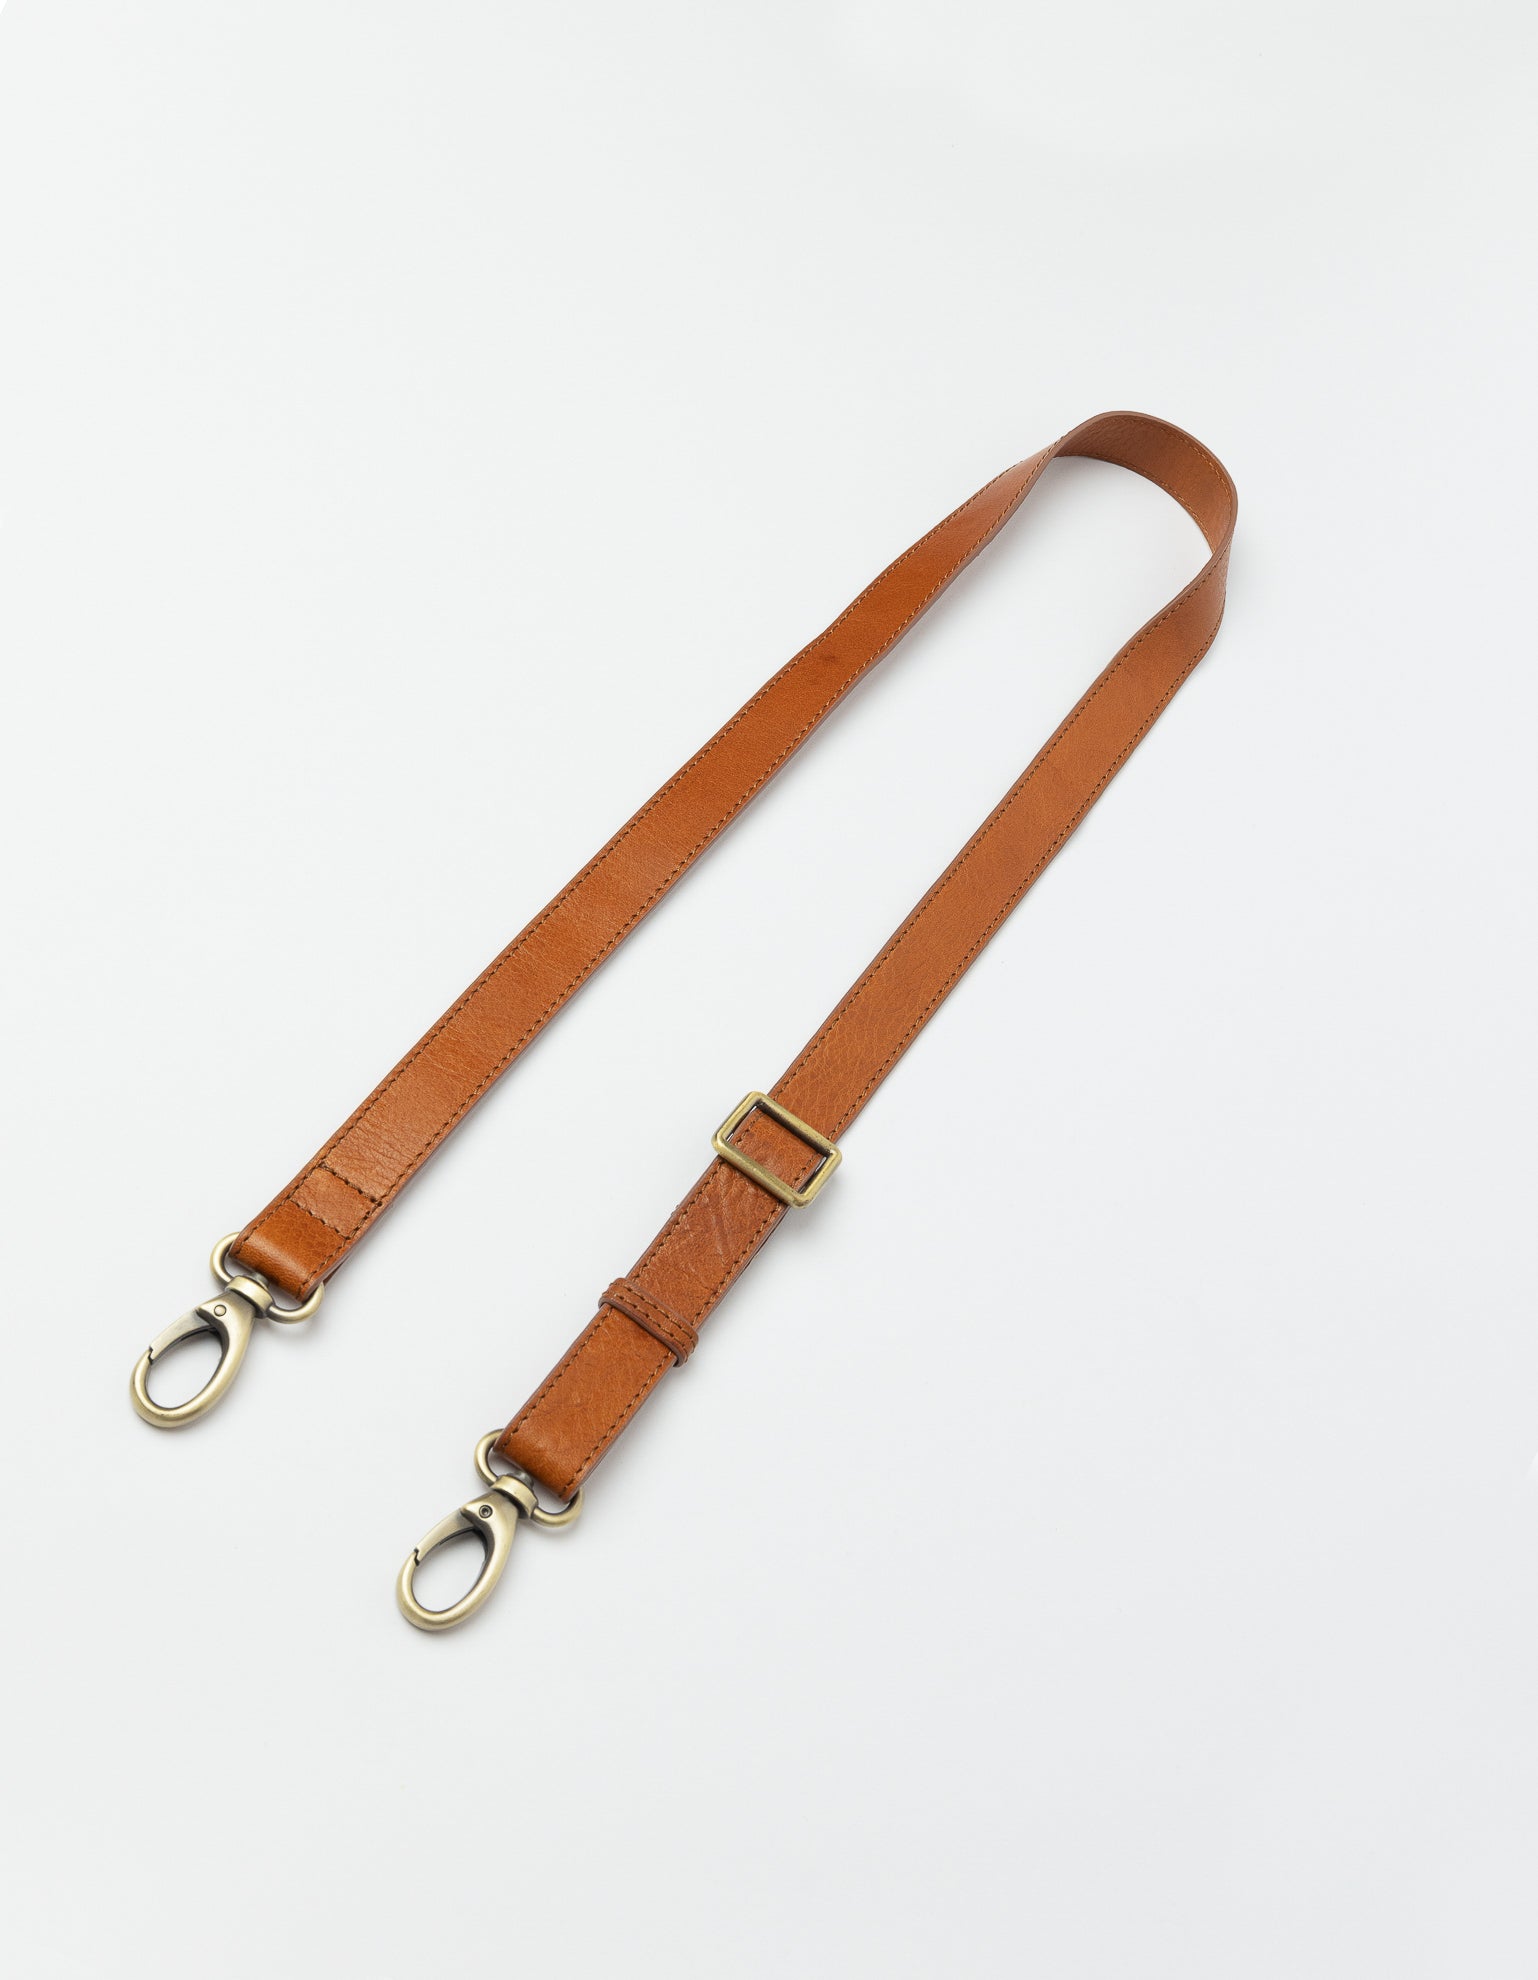 Webbing Straps with Leather | Replacement Purse Straps